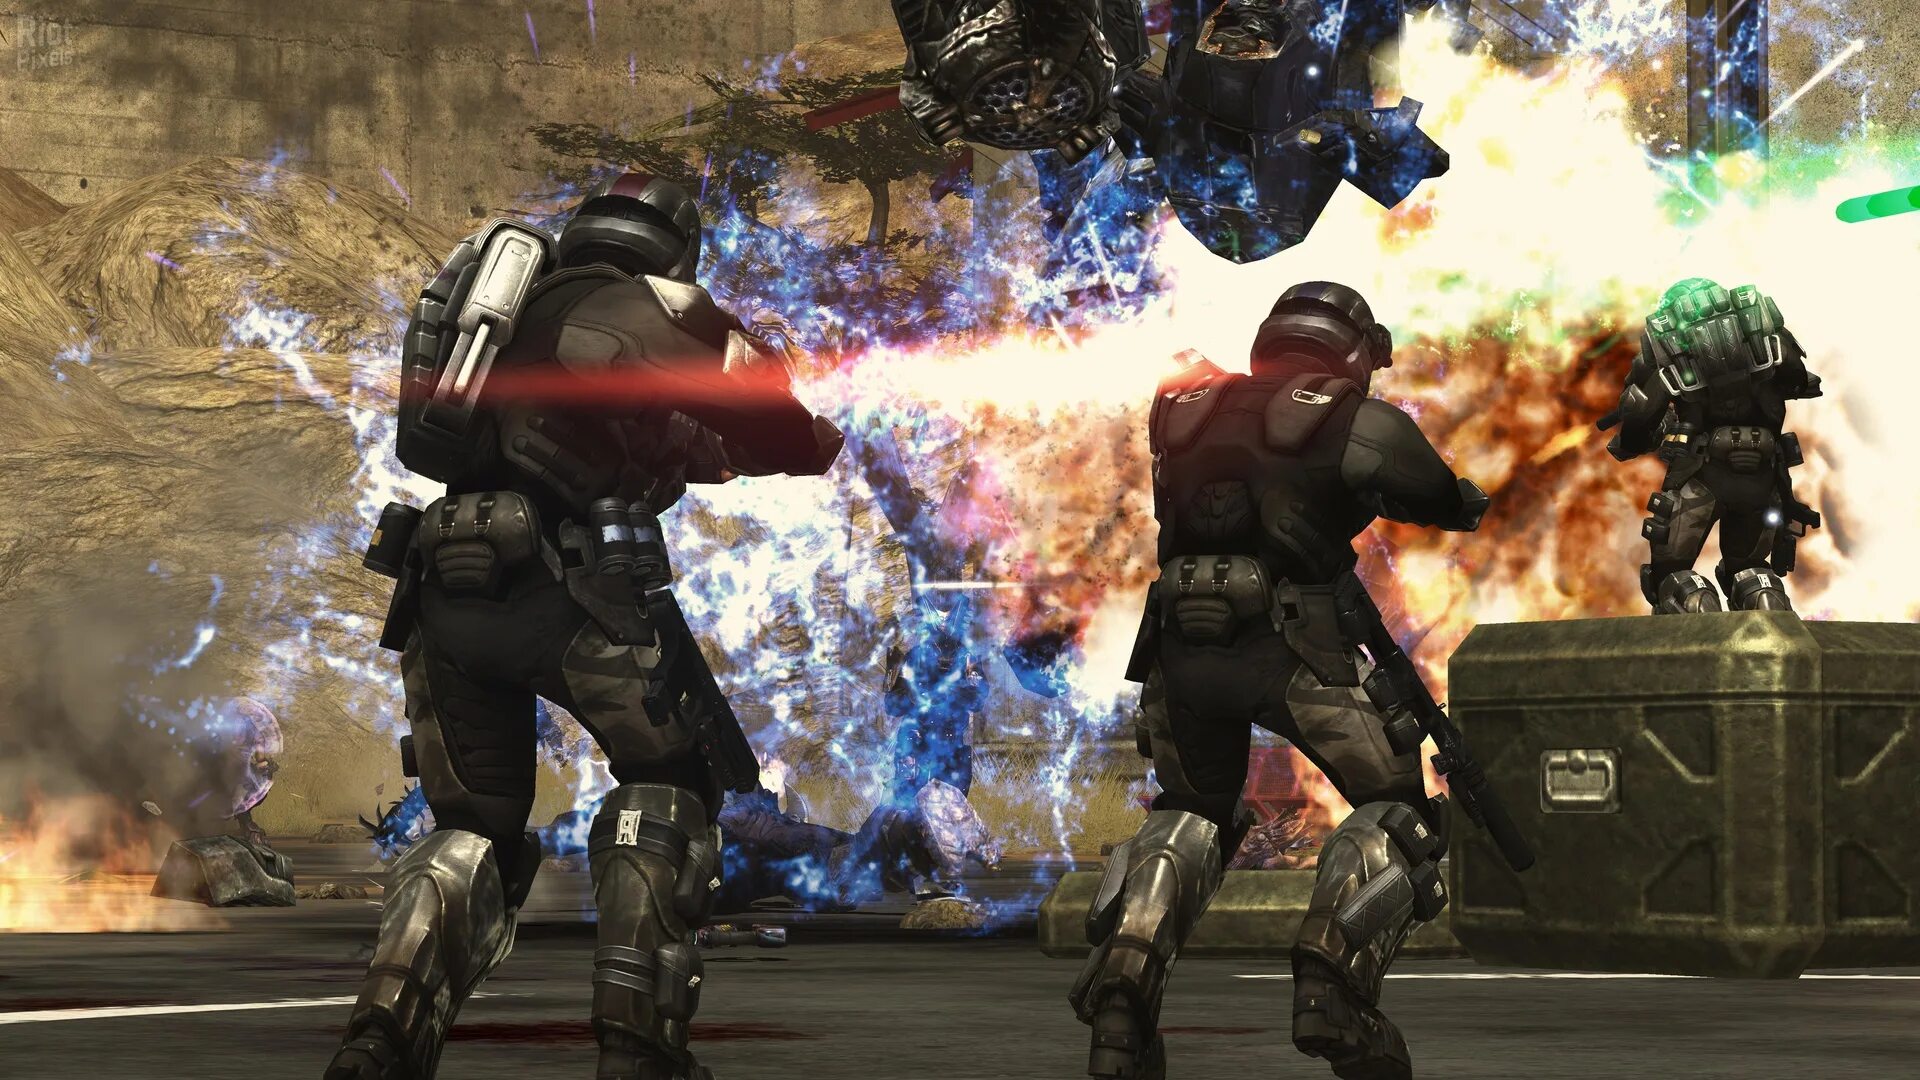 Хало 3 ODST. Halo 3 ODST (Xbox 360). Halo 3 ODST Скриншоты. Halo 3 ODST 2020. Будет ли halo 3